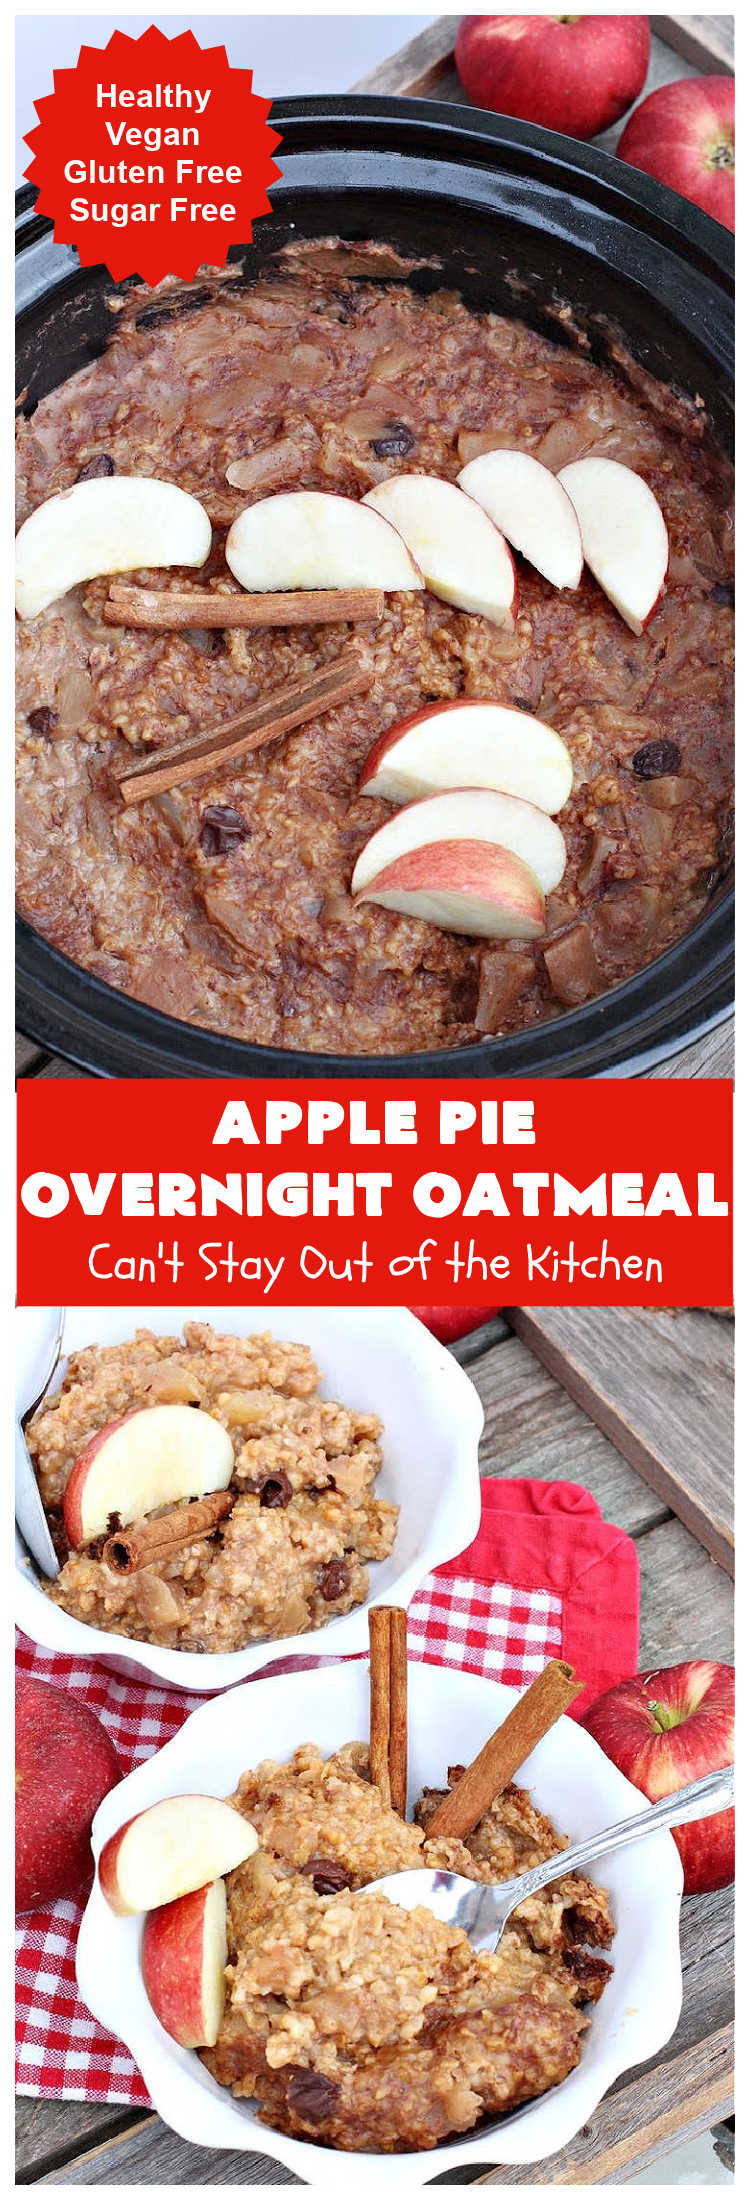 Apple Pie Overnight Oatmeal | Can't Stay Out of the Kitchen | this fantastic #oatmeal #recipe uses steel-cut oats & cooks them up to perfection in the #crockpot. They're filled with #apples & #cinnamon for great #ApplePie flavor. Using a programmable #SlowCooker makes this a wonderful #breakfast idea for a #holiday breakfast too. #healthy, #vegan #GlutenFree #SugarFree #HolidayBreakfast  #OvernightOatmeal #ApplePieOvernightOatmeal